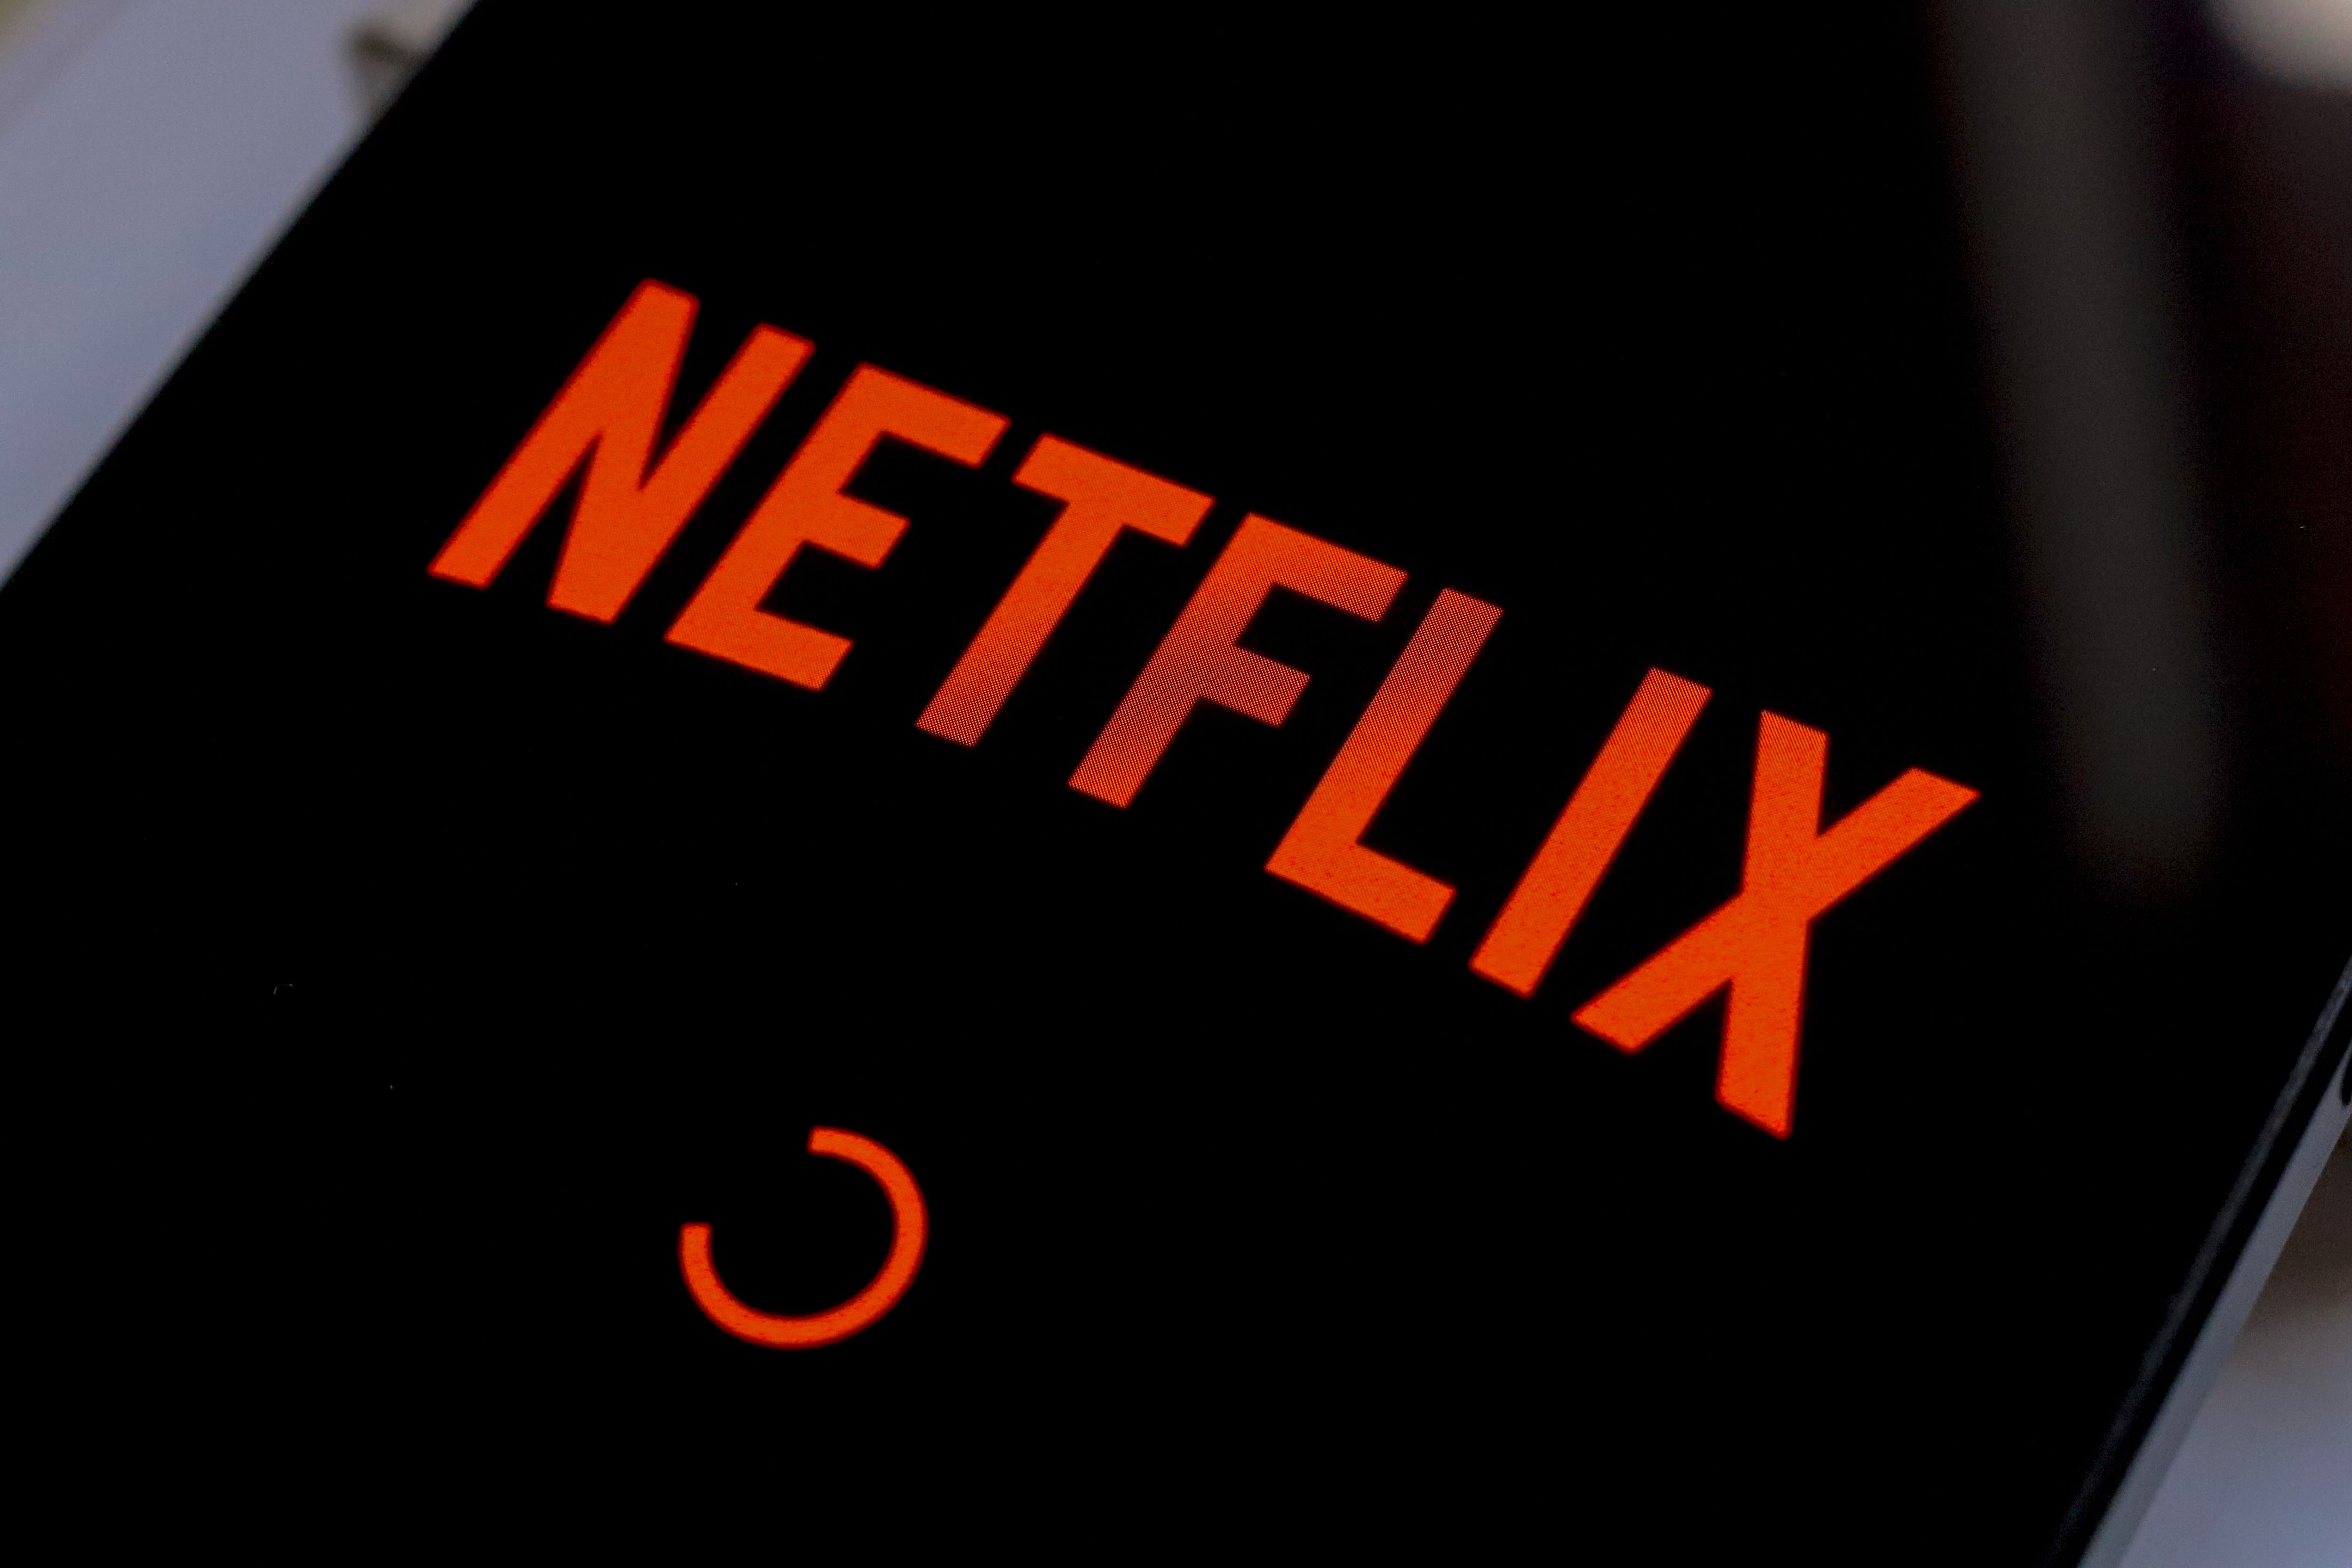 Netflix stock under pressure — why one analyst sees the pullback as a buying opportunity